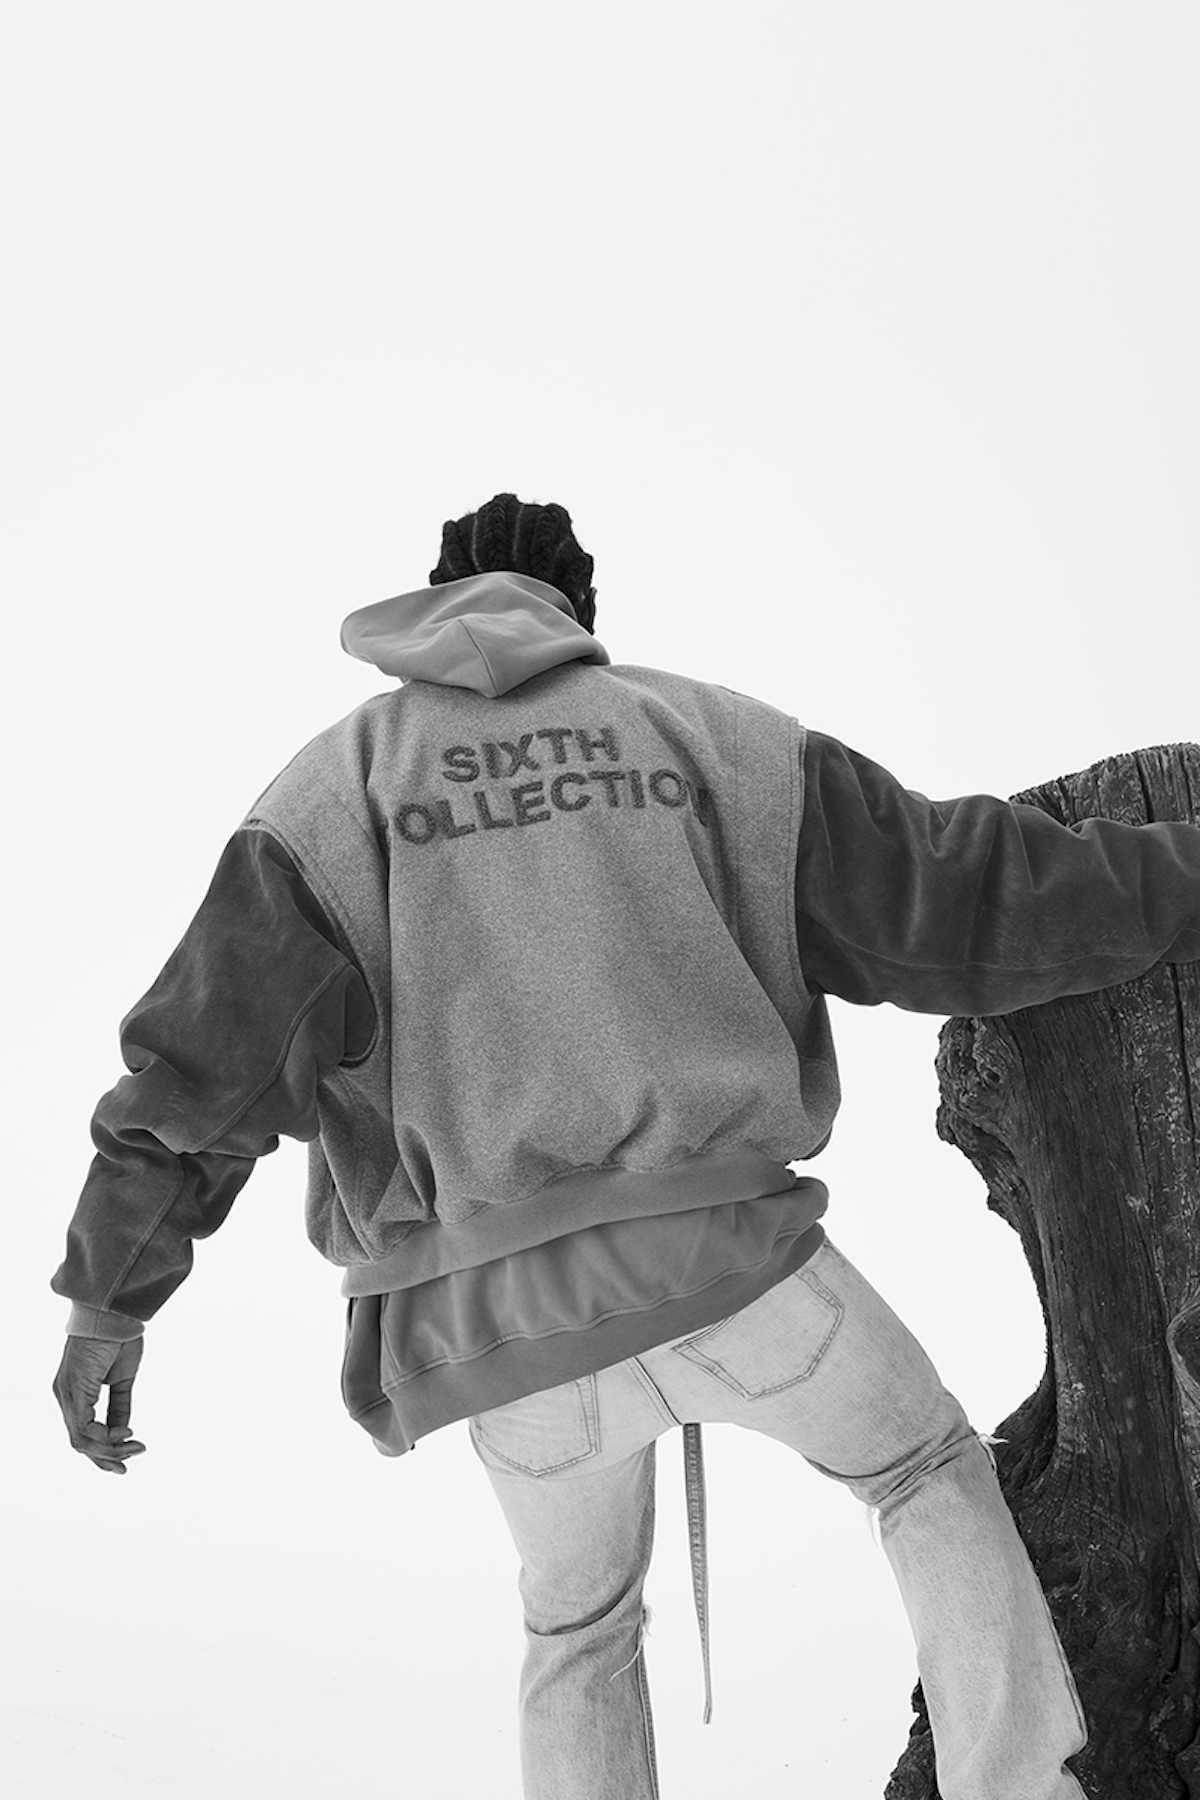 Fear of God’s Spring/Summer 2019 Collection Drops in Full Today